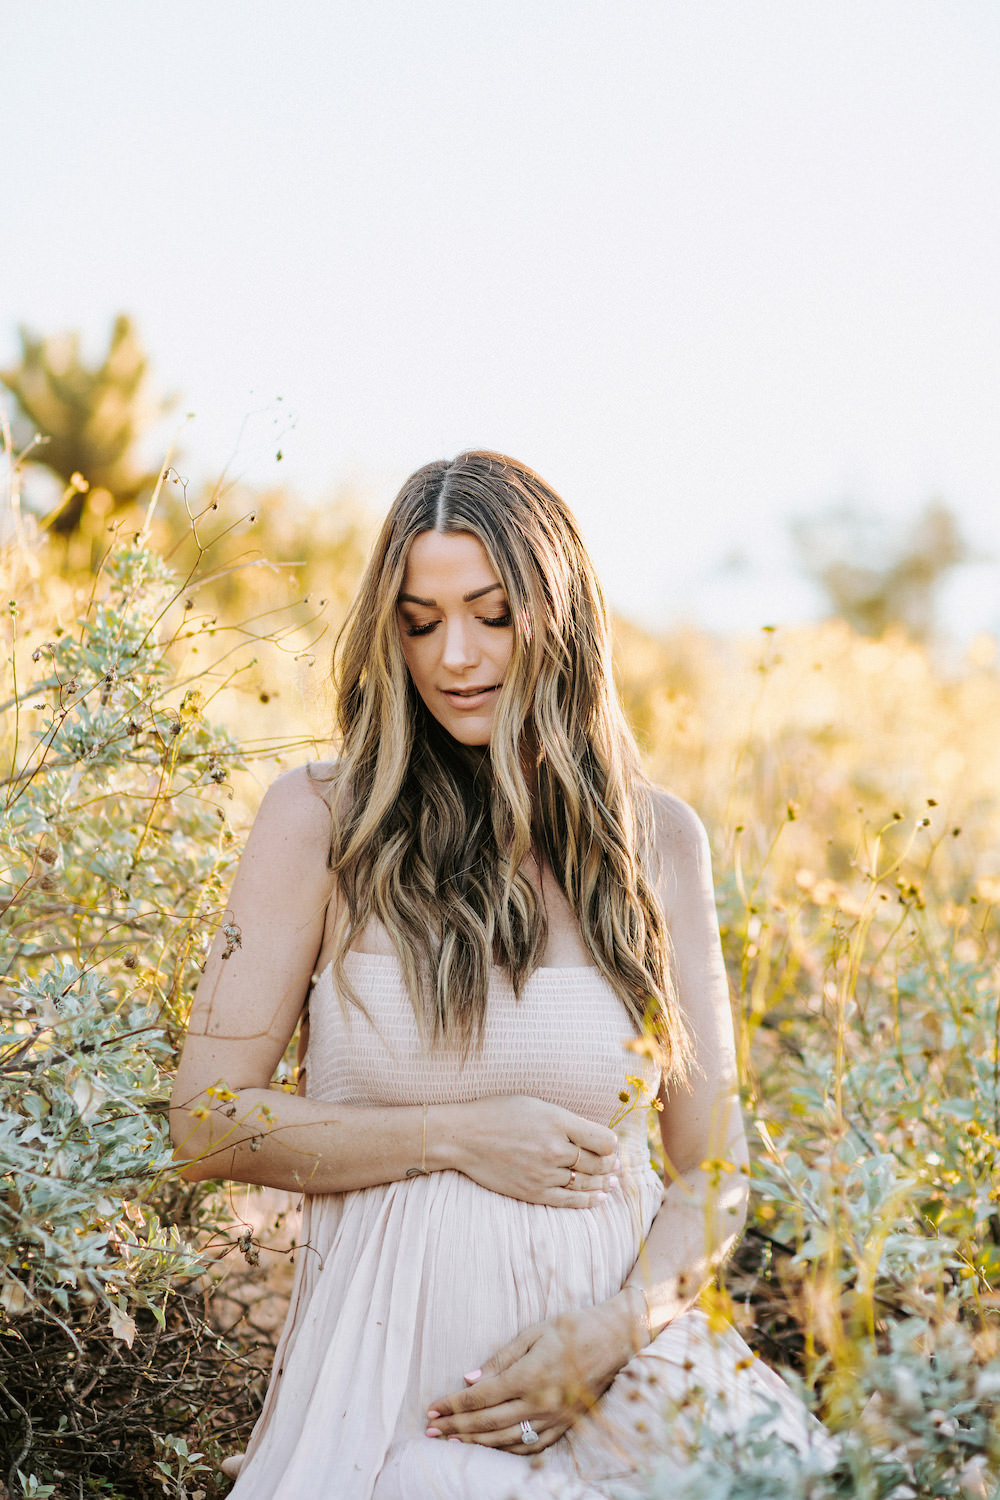 Dash of Darling | Naturally Pregnant After Six Years of Infertility and IVF